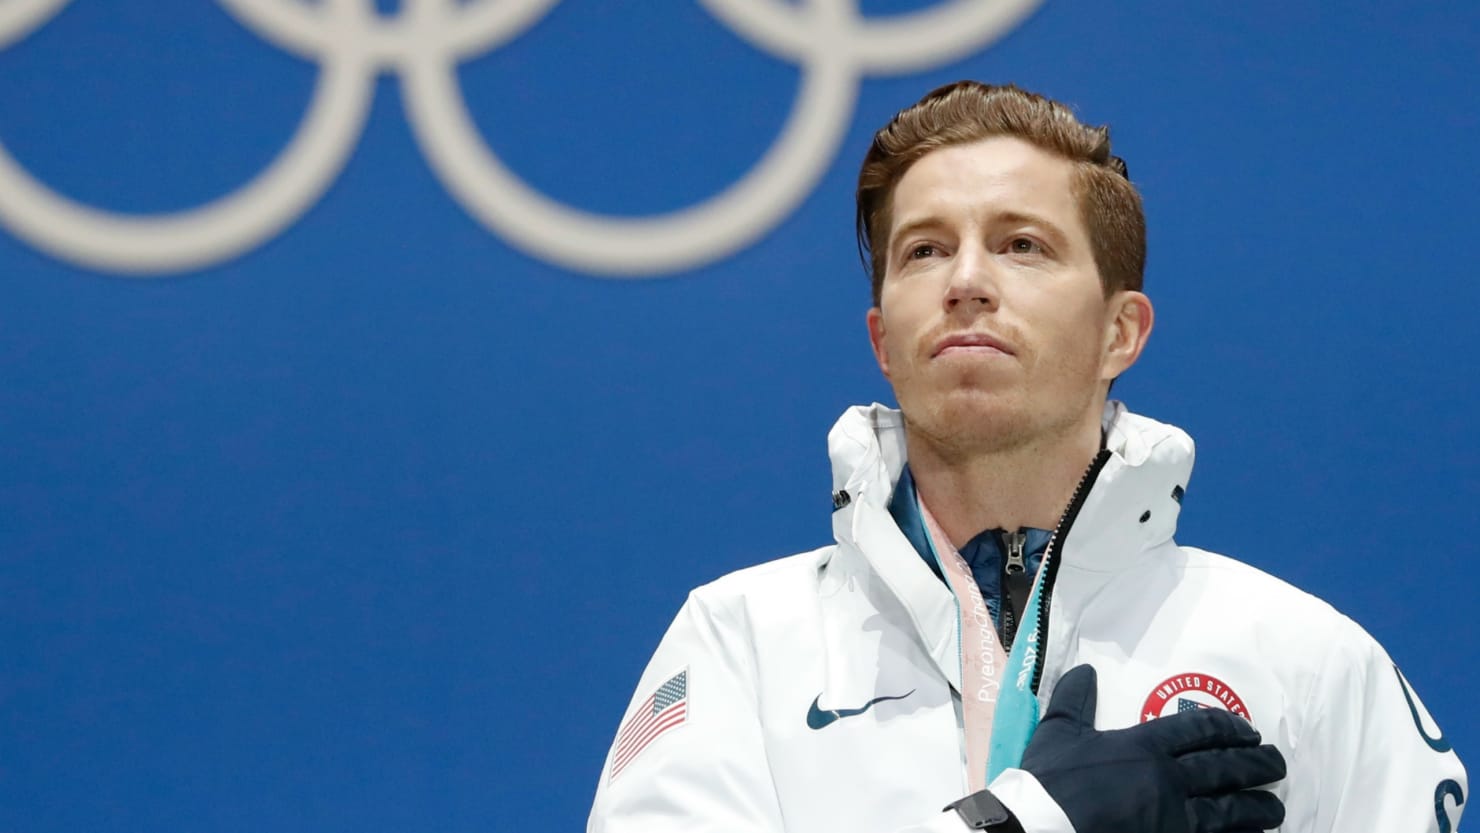 Shaun White Has Apologized for Offensive Simple Jack Halloween Costume